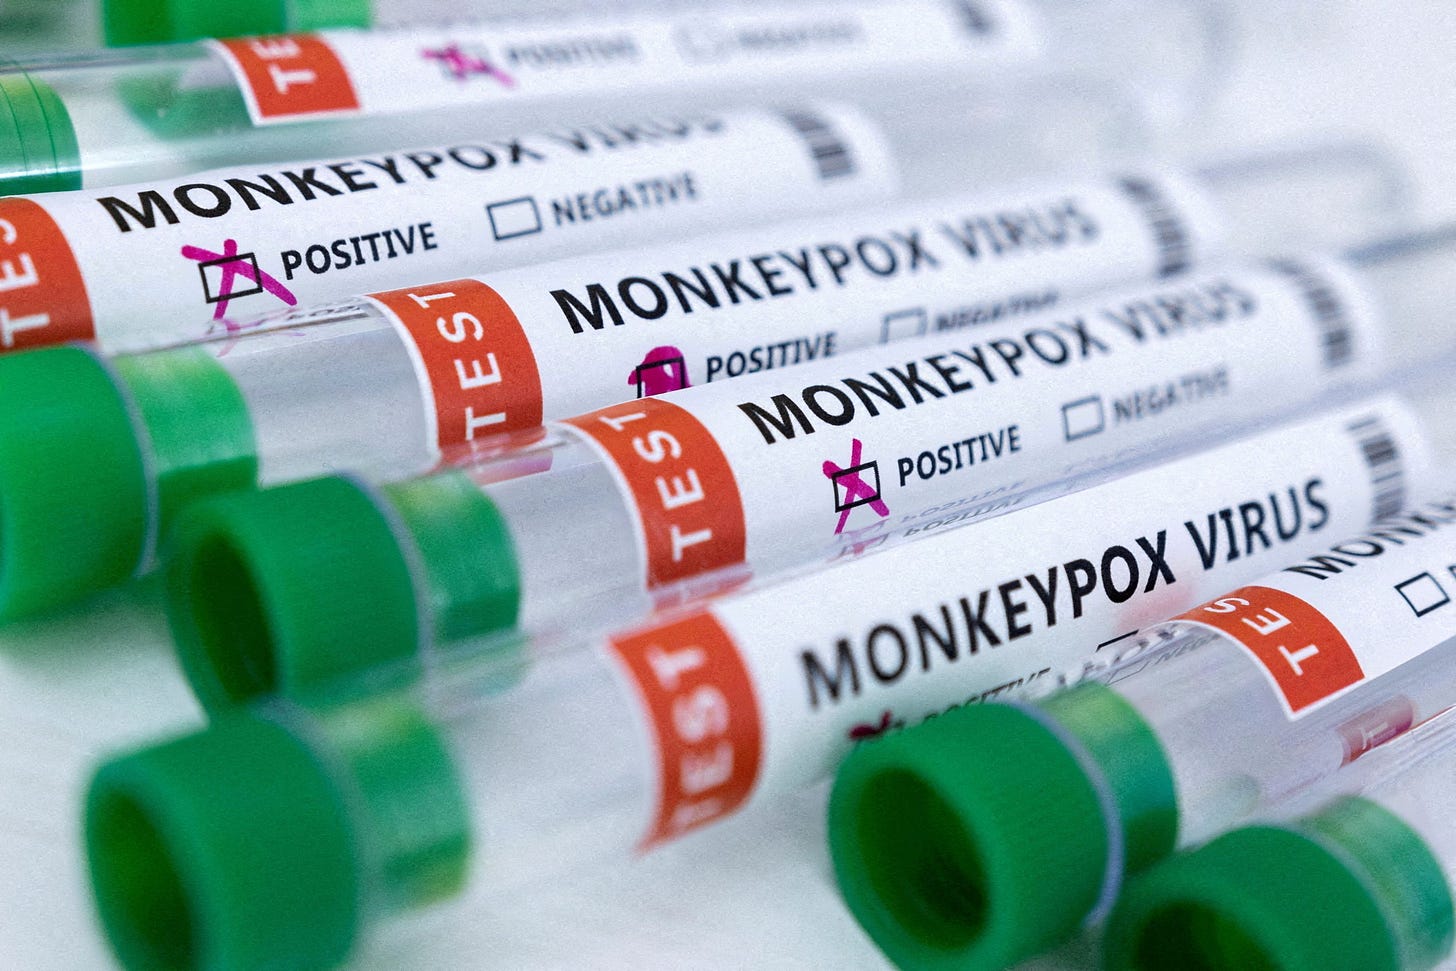 An adult with 'various severe illnesses' including monkeypox, has died in Texas